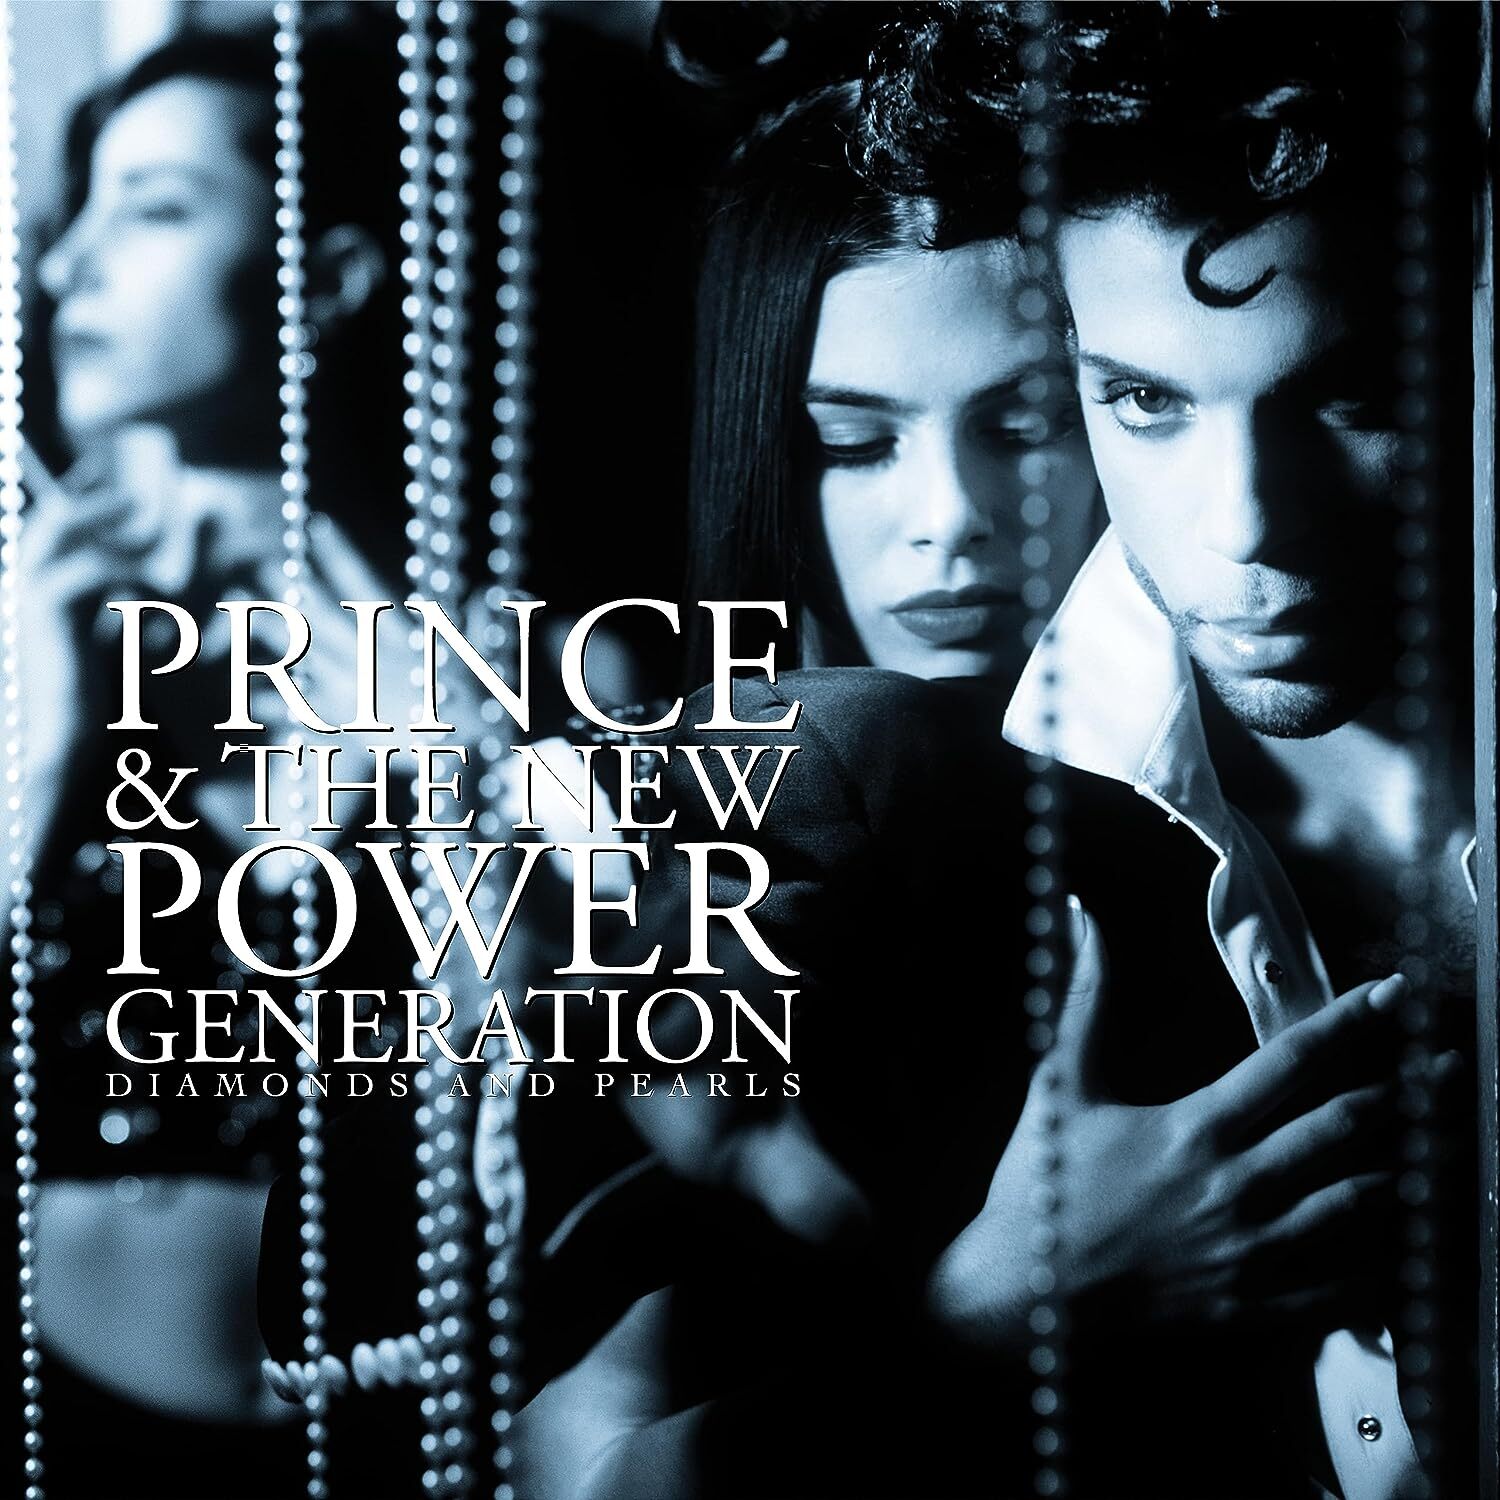 Prince and The New Power Generation: Diamonds and Pearls Blu-ray 